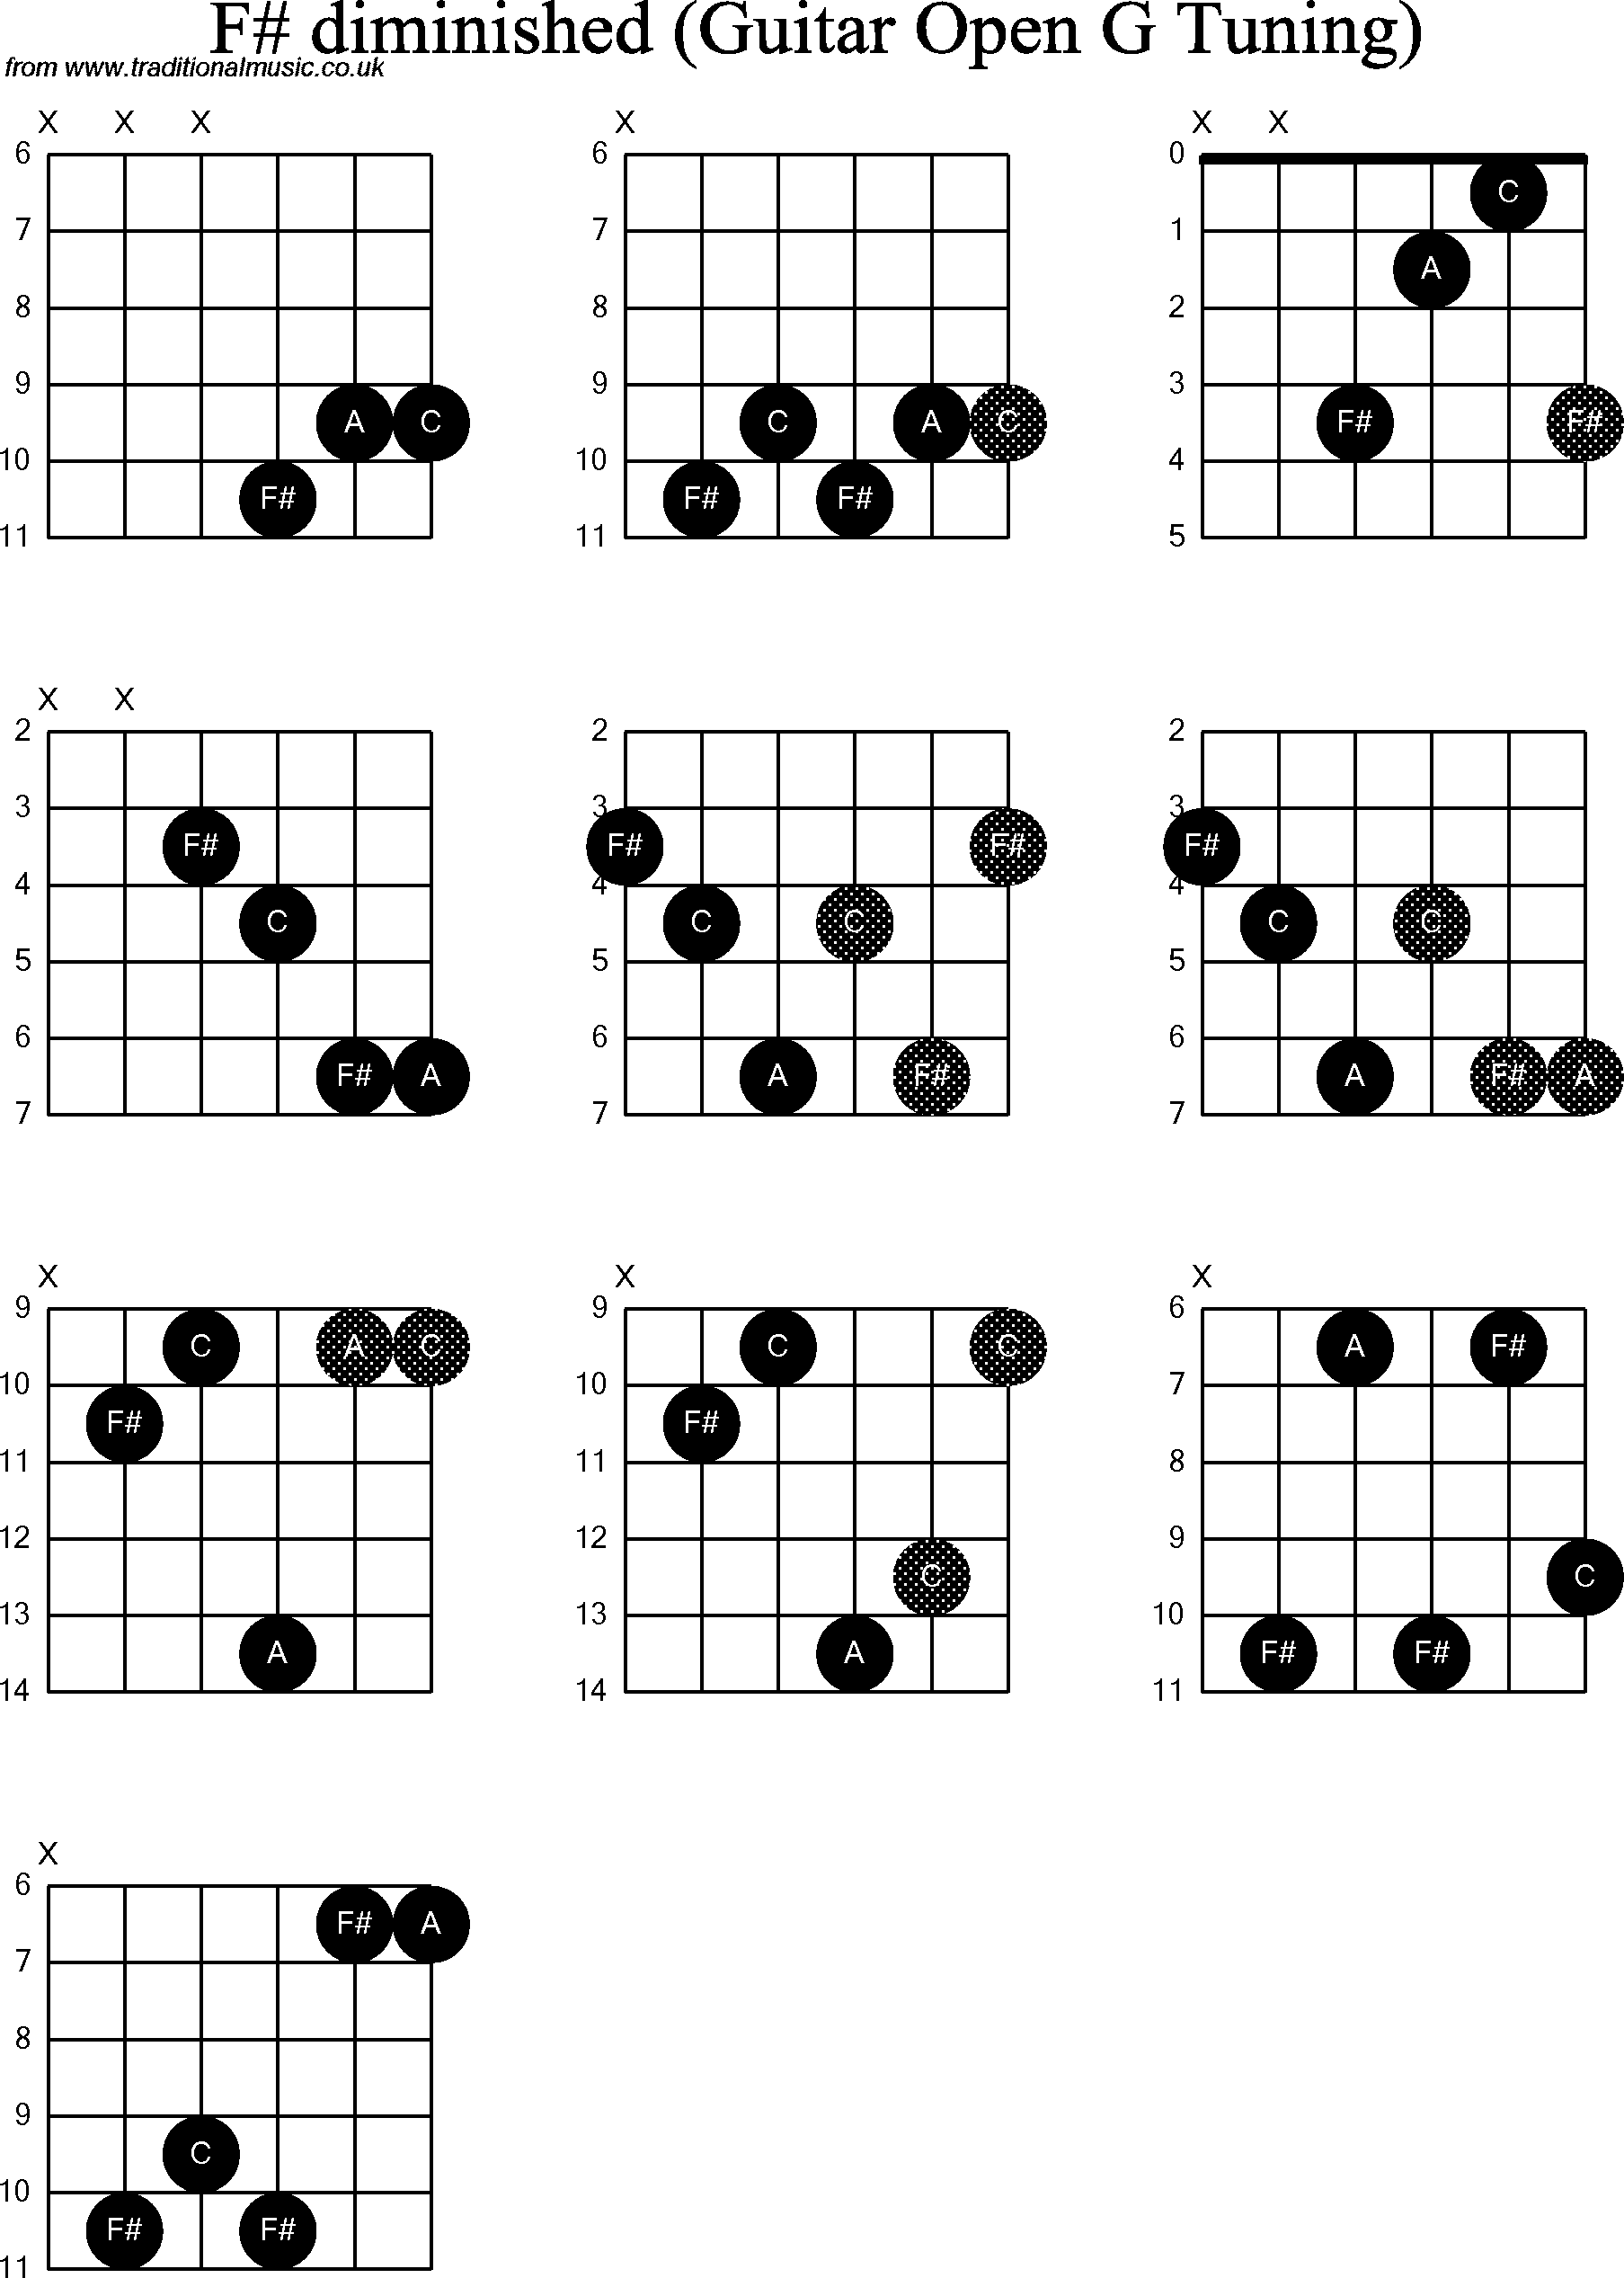 Chord diagrams for Dobro F# Diminished